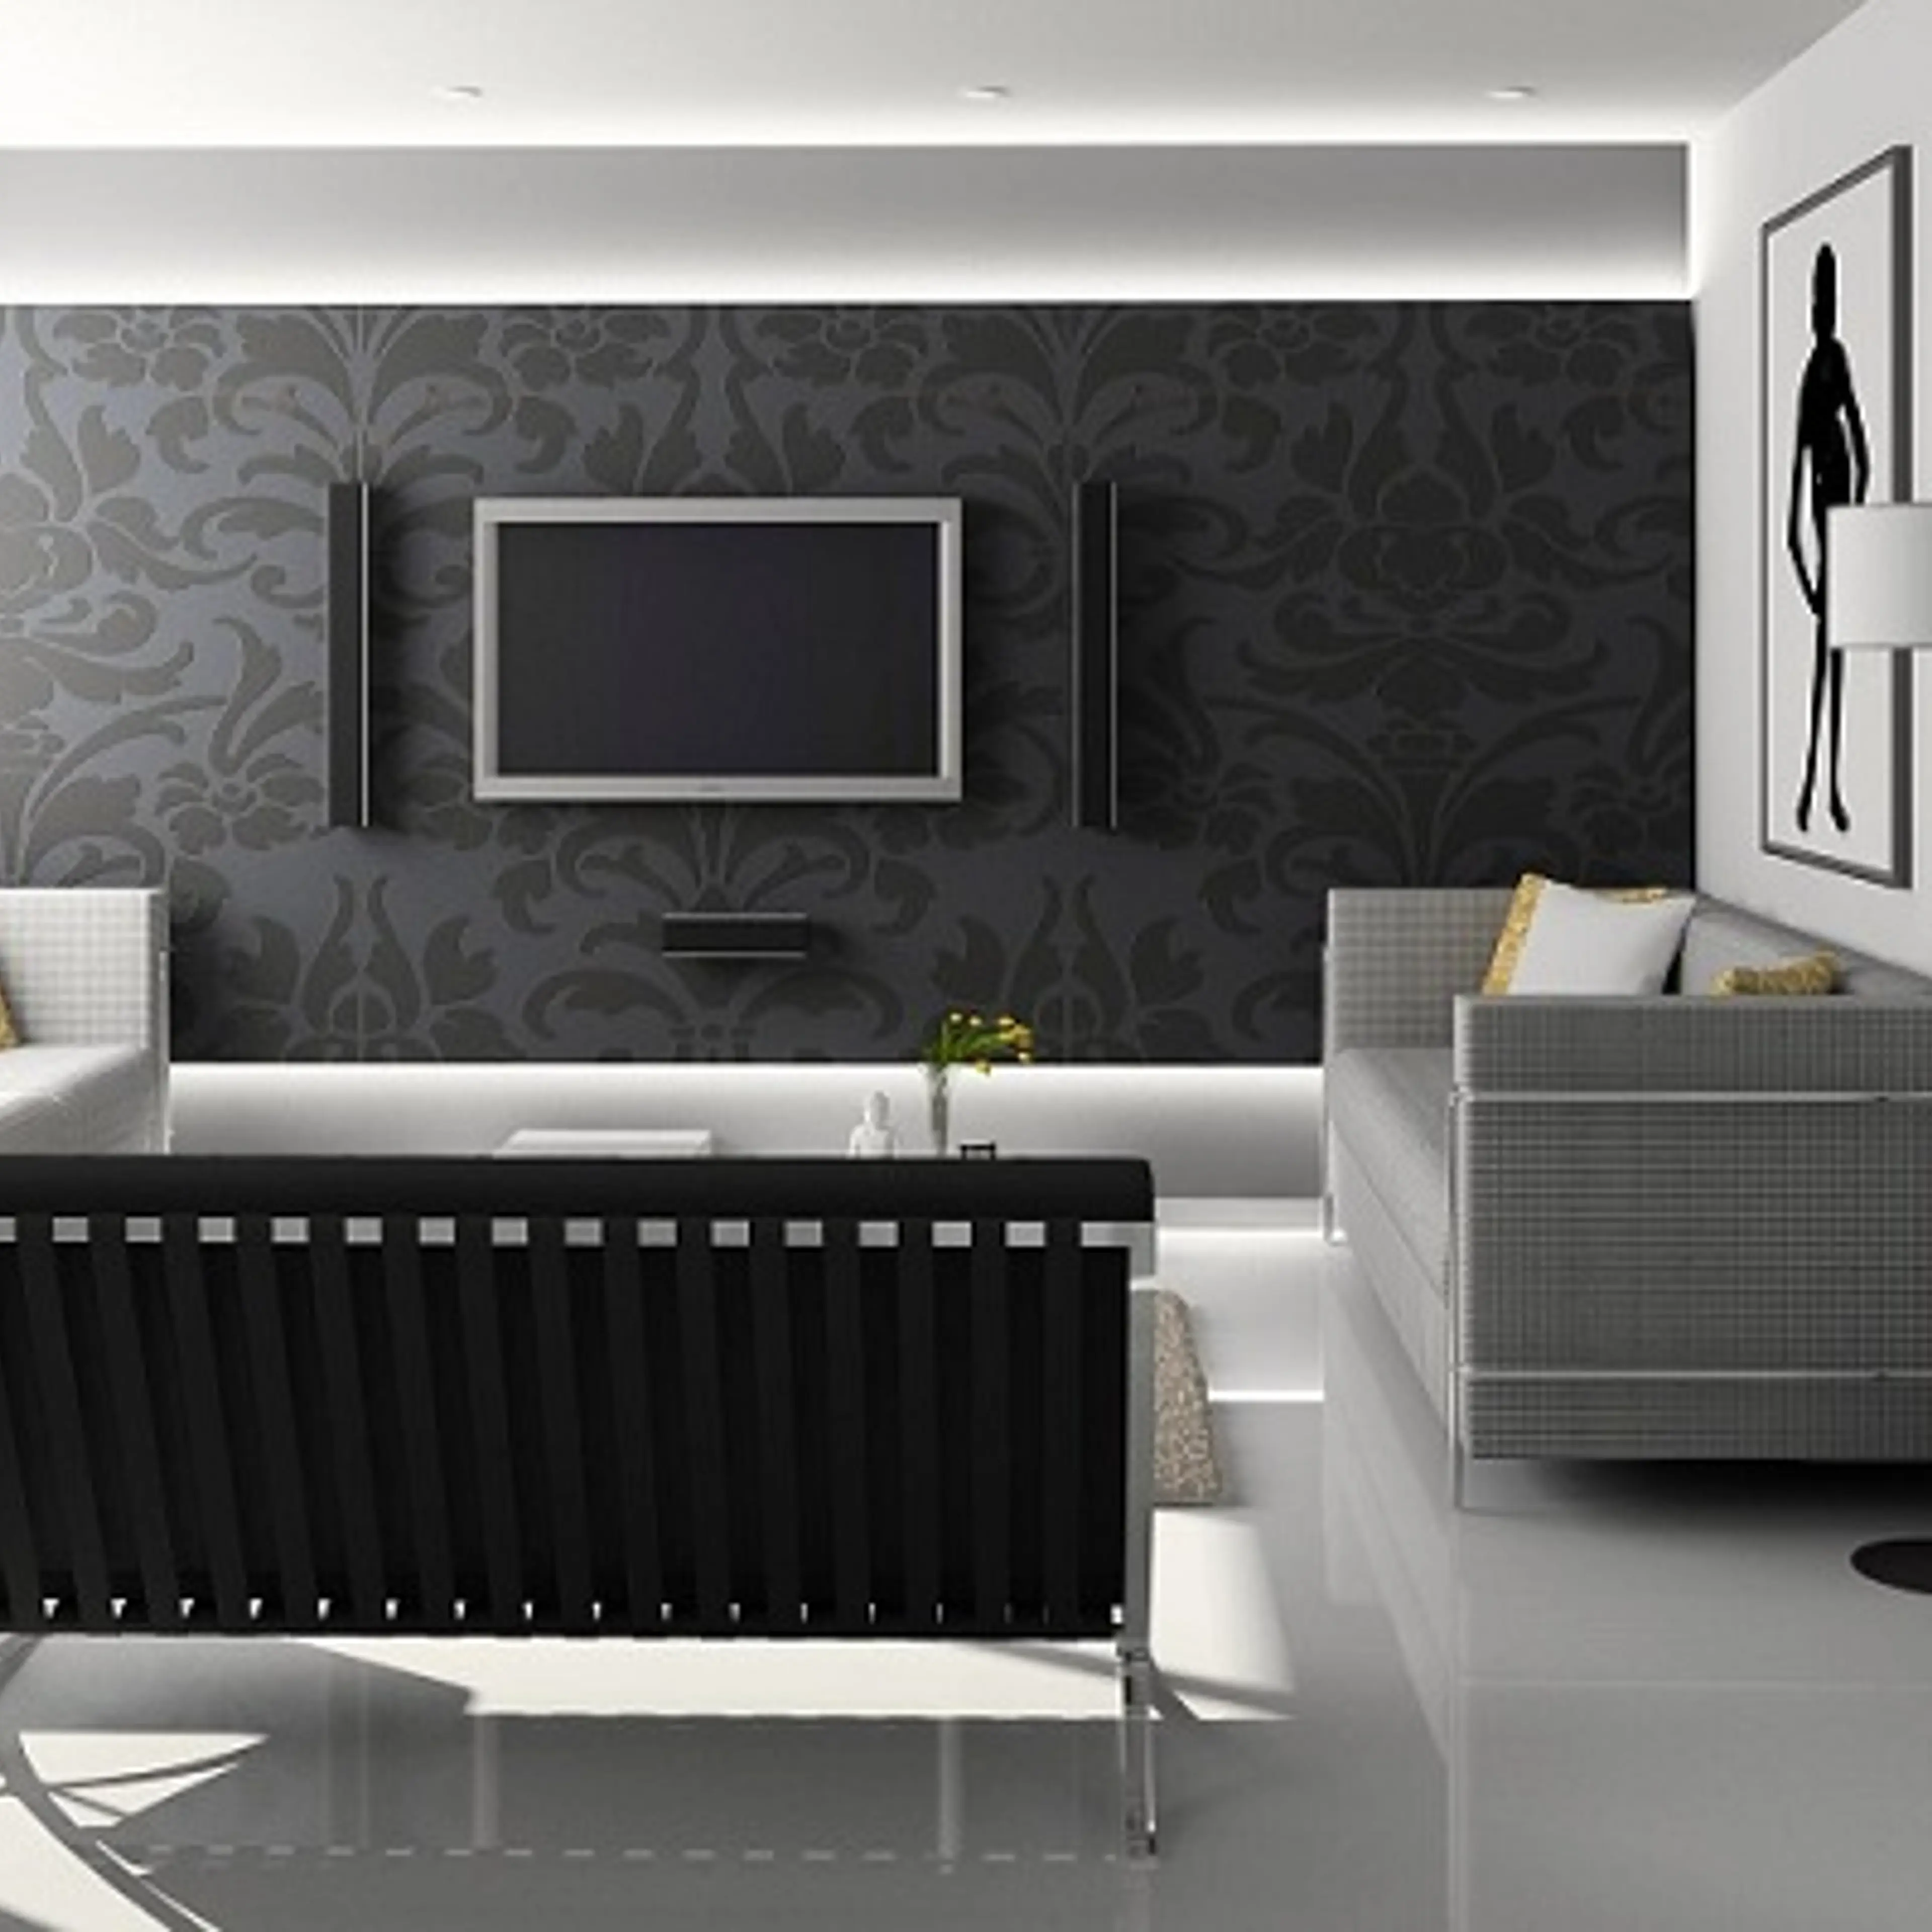 These 5 interior designing startups caught investors’ attention recently